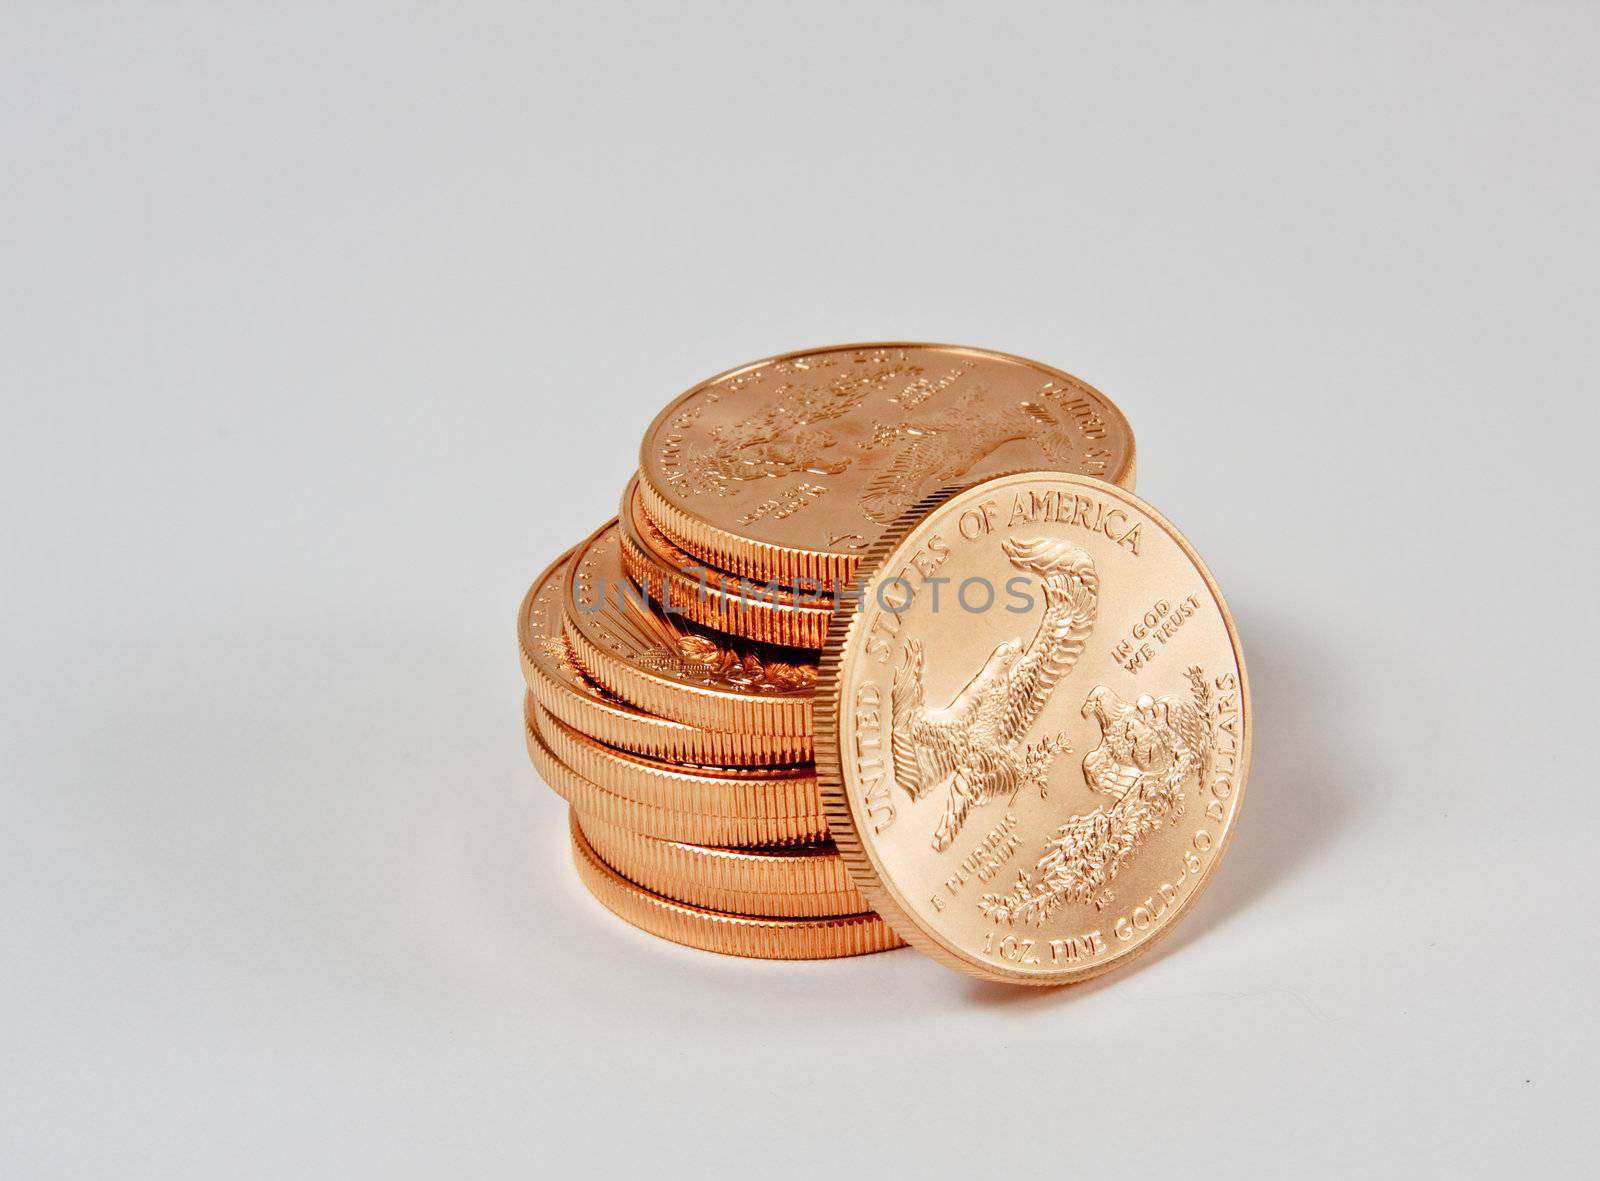 1 Ounce gold eagle coins in a stack with one coin loose